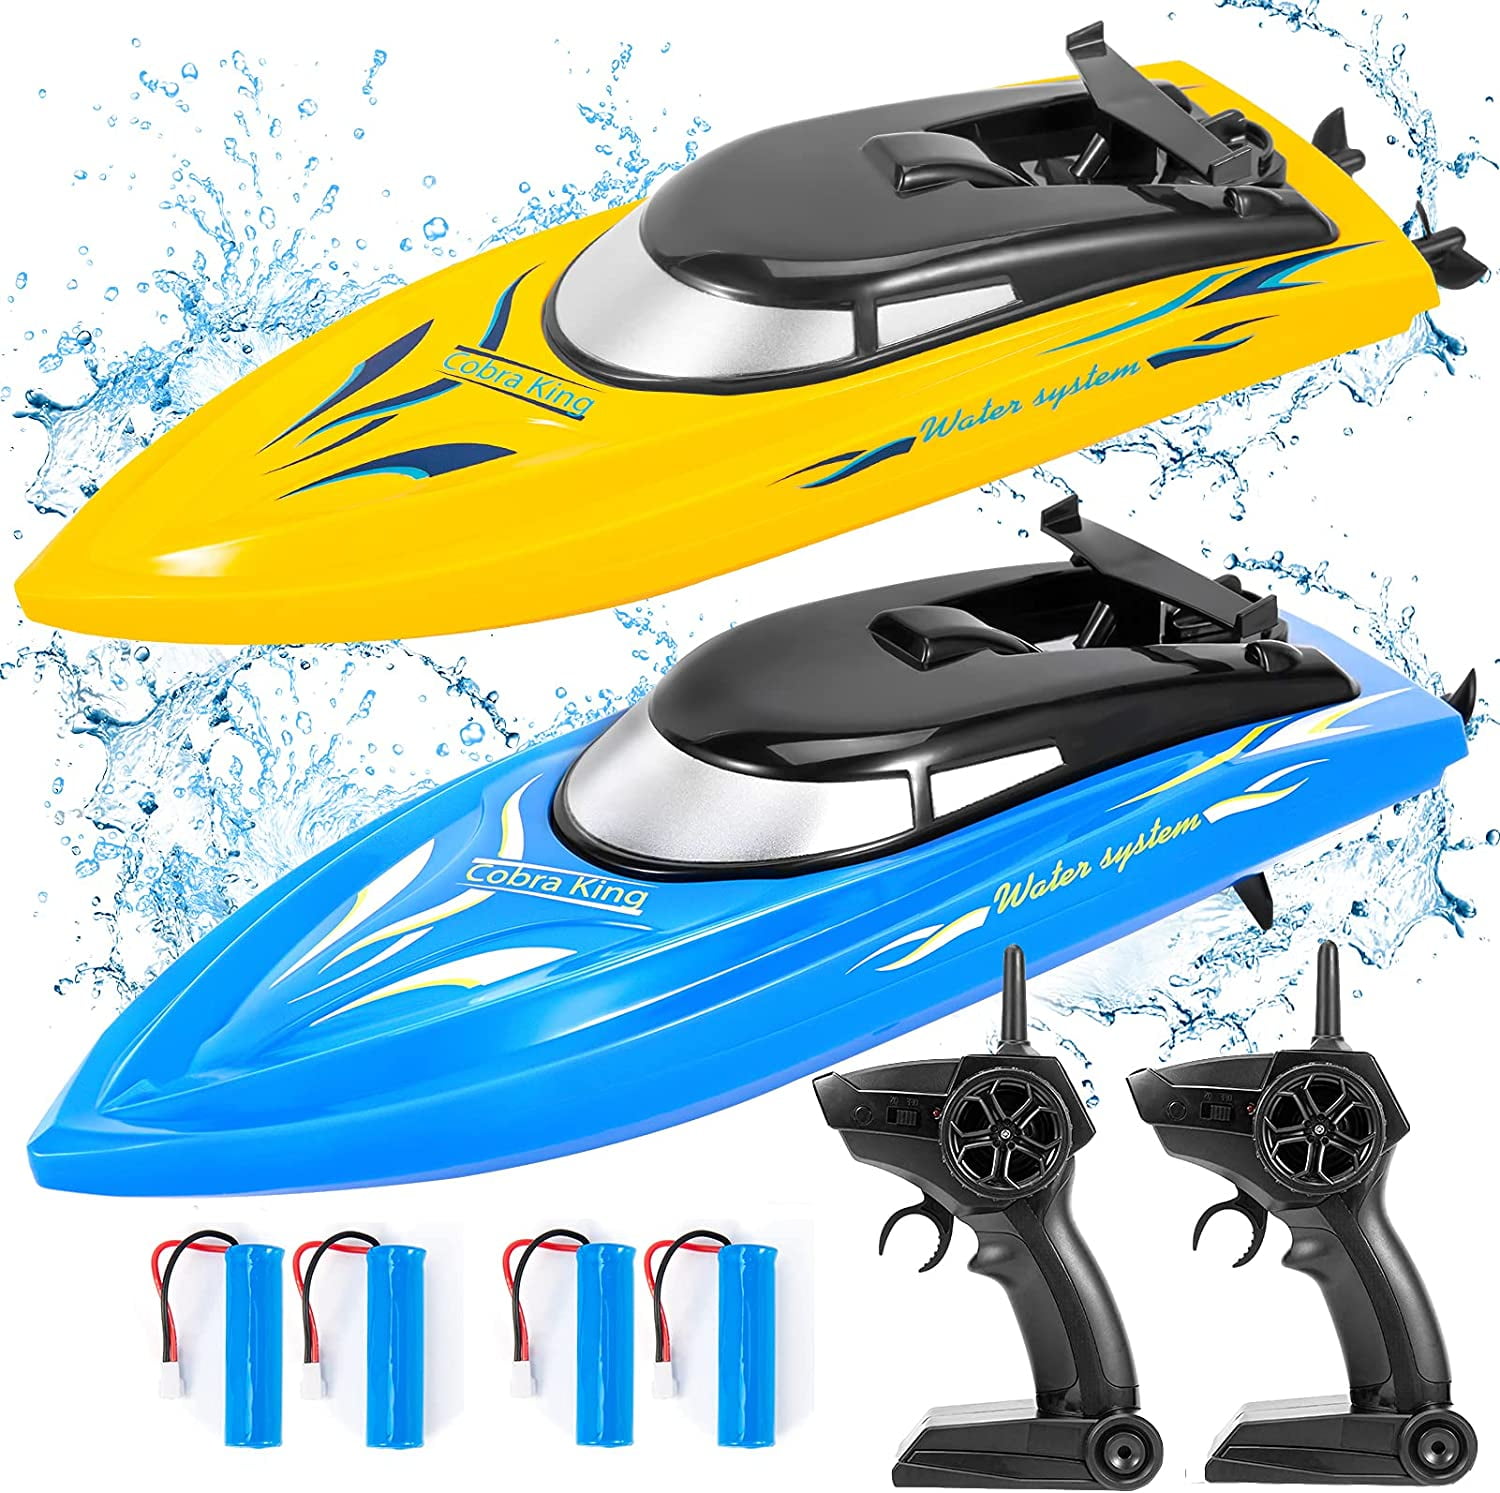 Veecome 2 Pack RC Boat for Pool and Lake, 2.4G 10Km/H High Speed Remote ...